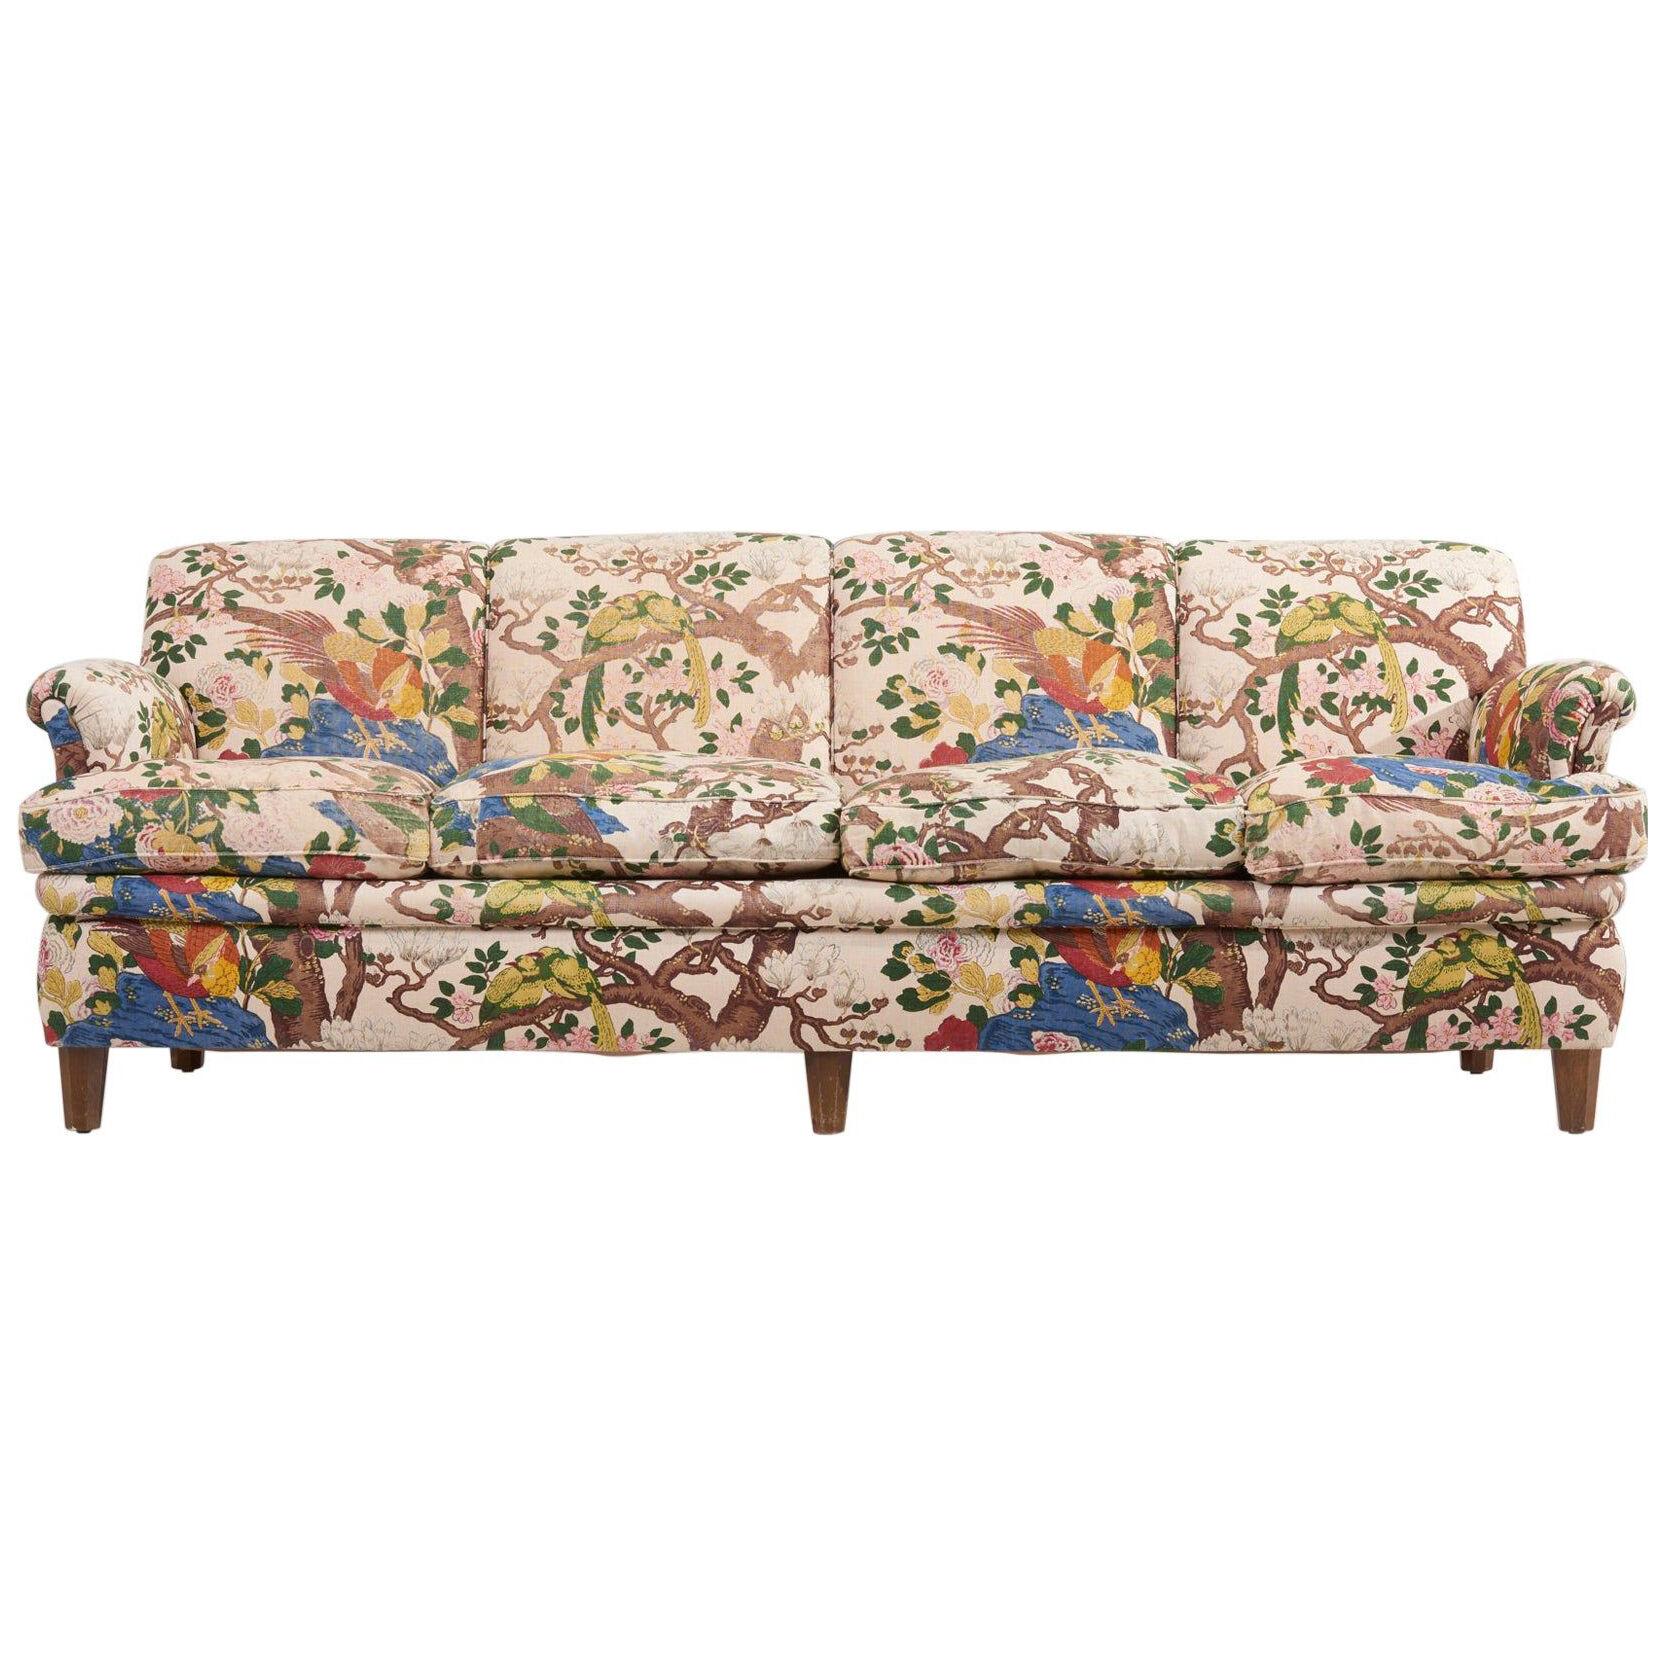 4-Seat Sofa with Floral Fabric by Josef Frank for Svenskt Tenn, 1950s